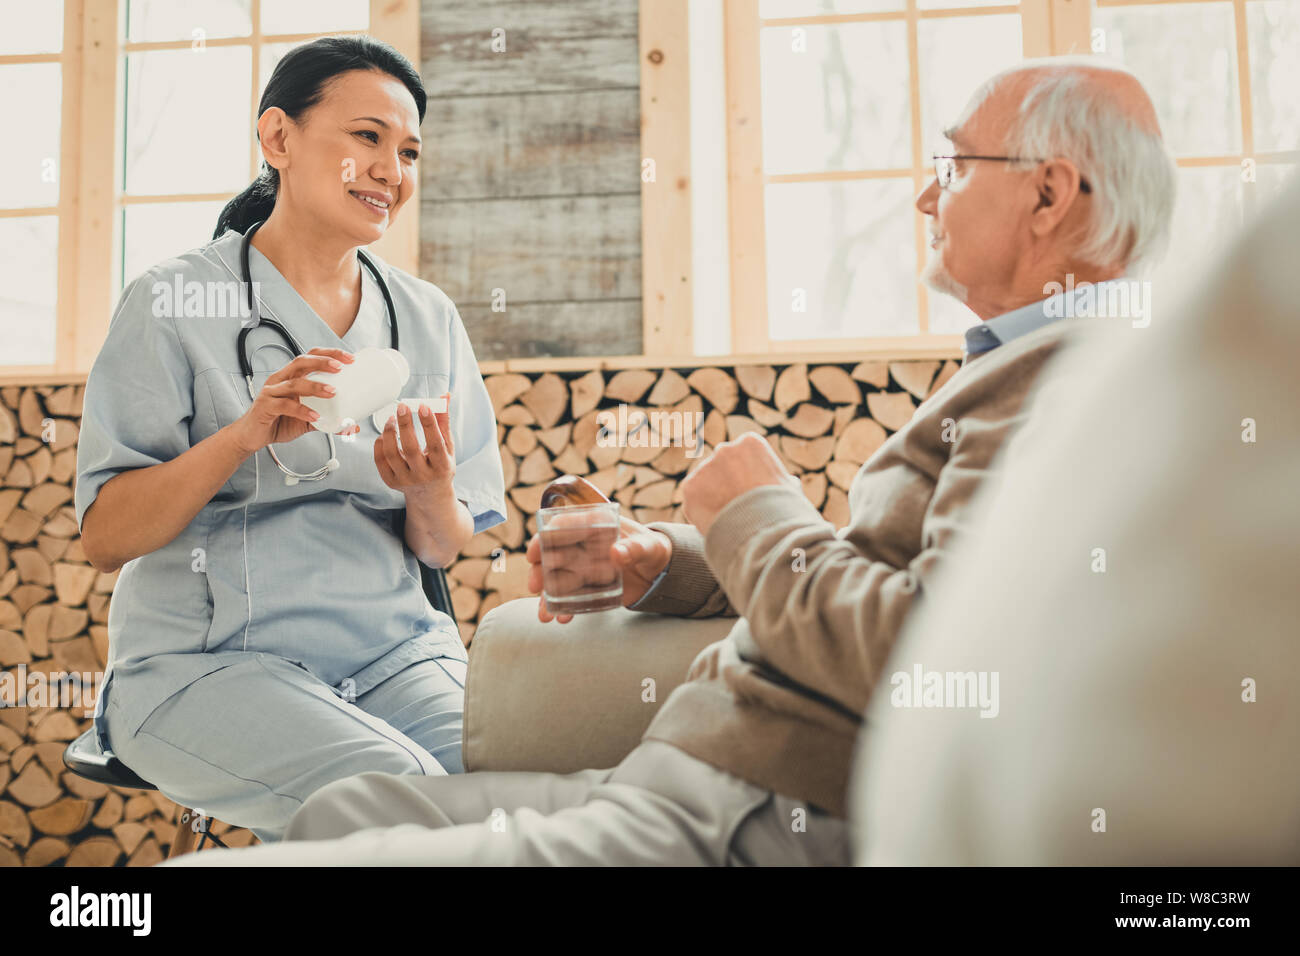 Smiling kind woman sitting in chair against old man Stock Photo